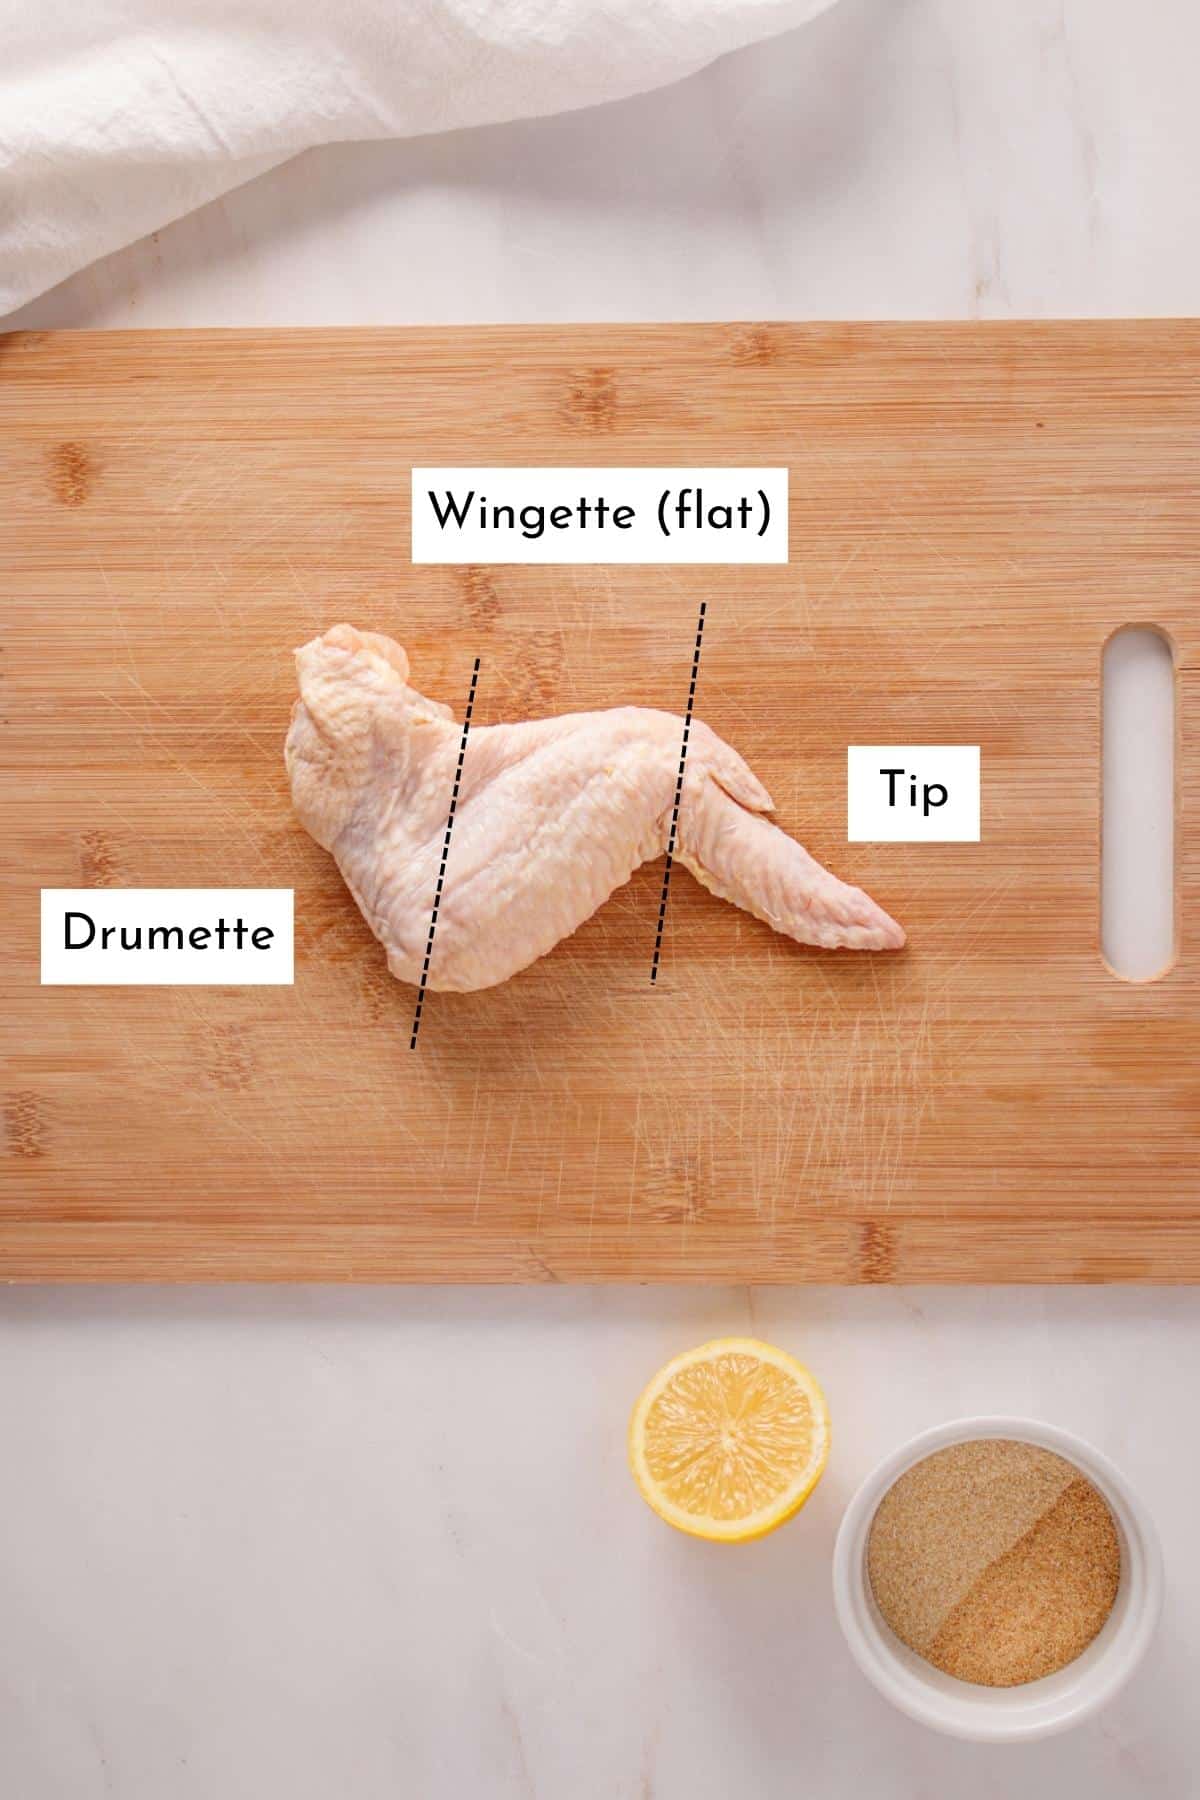 A chicken wing with labeled parts on the image: drumette, wingette and the tip.